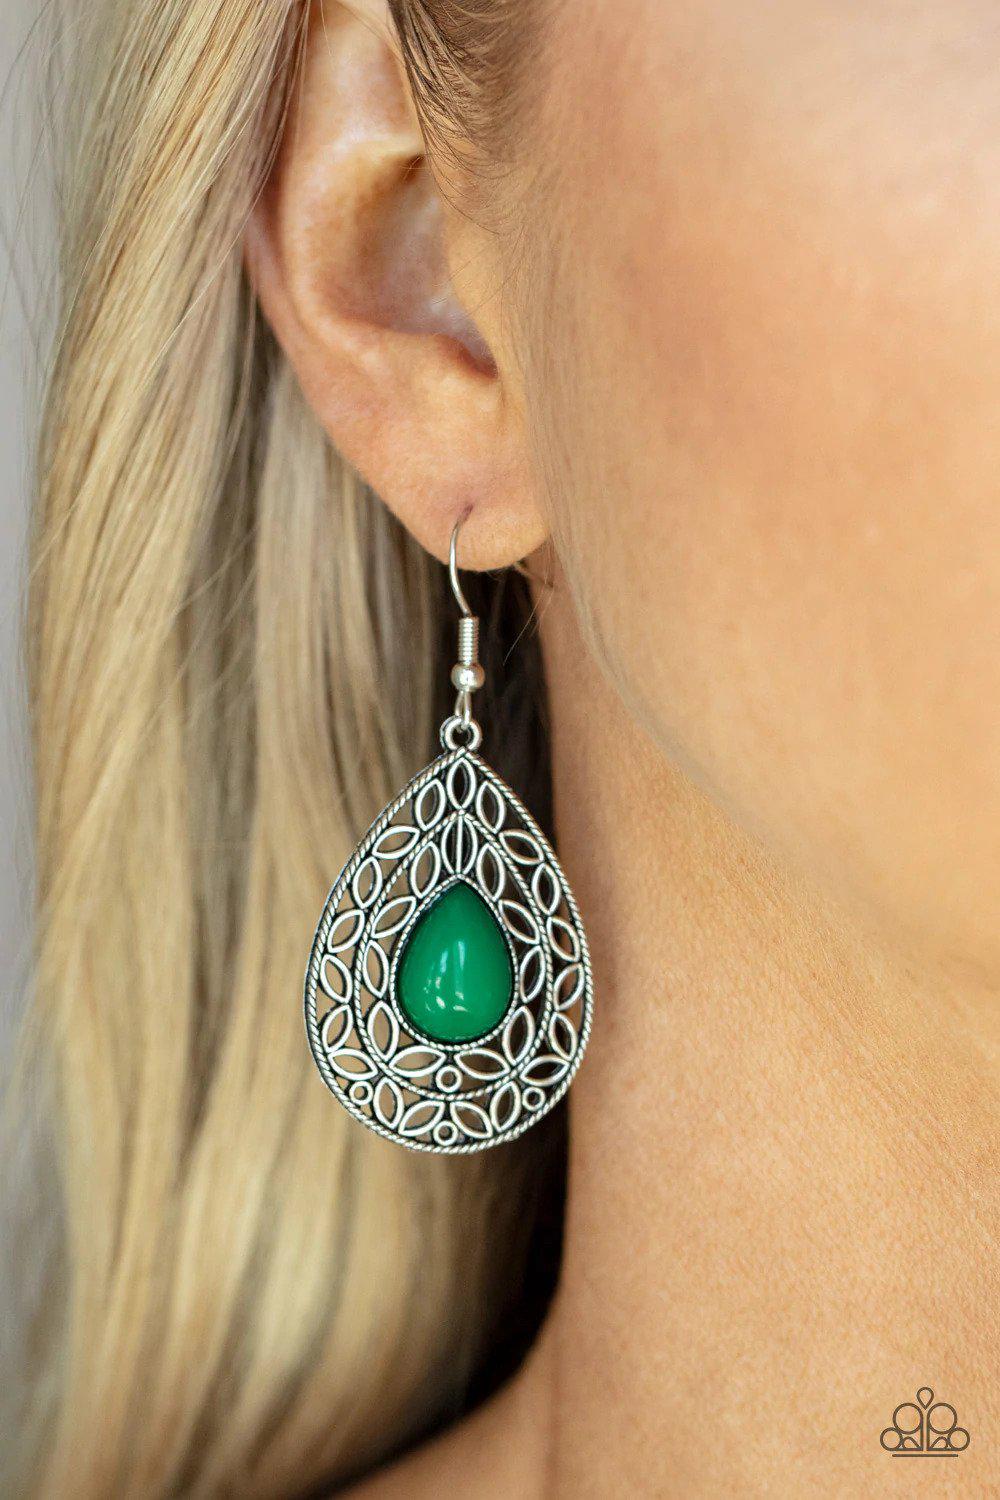 Fanciful Droplets Green Earrings - Paparazzi Accessories- lightbox - CarasShop.com - $5 Jewelry by Cara Jewels